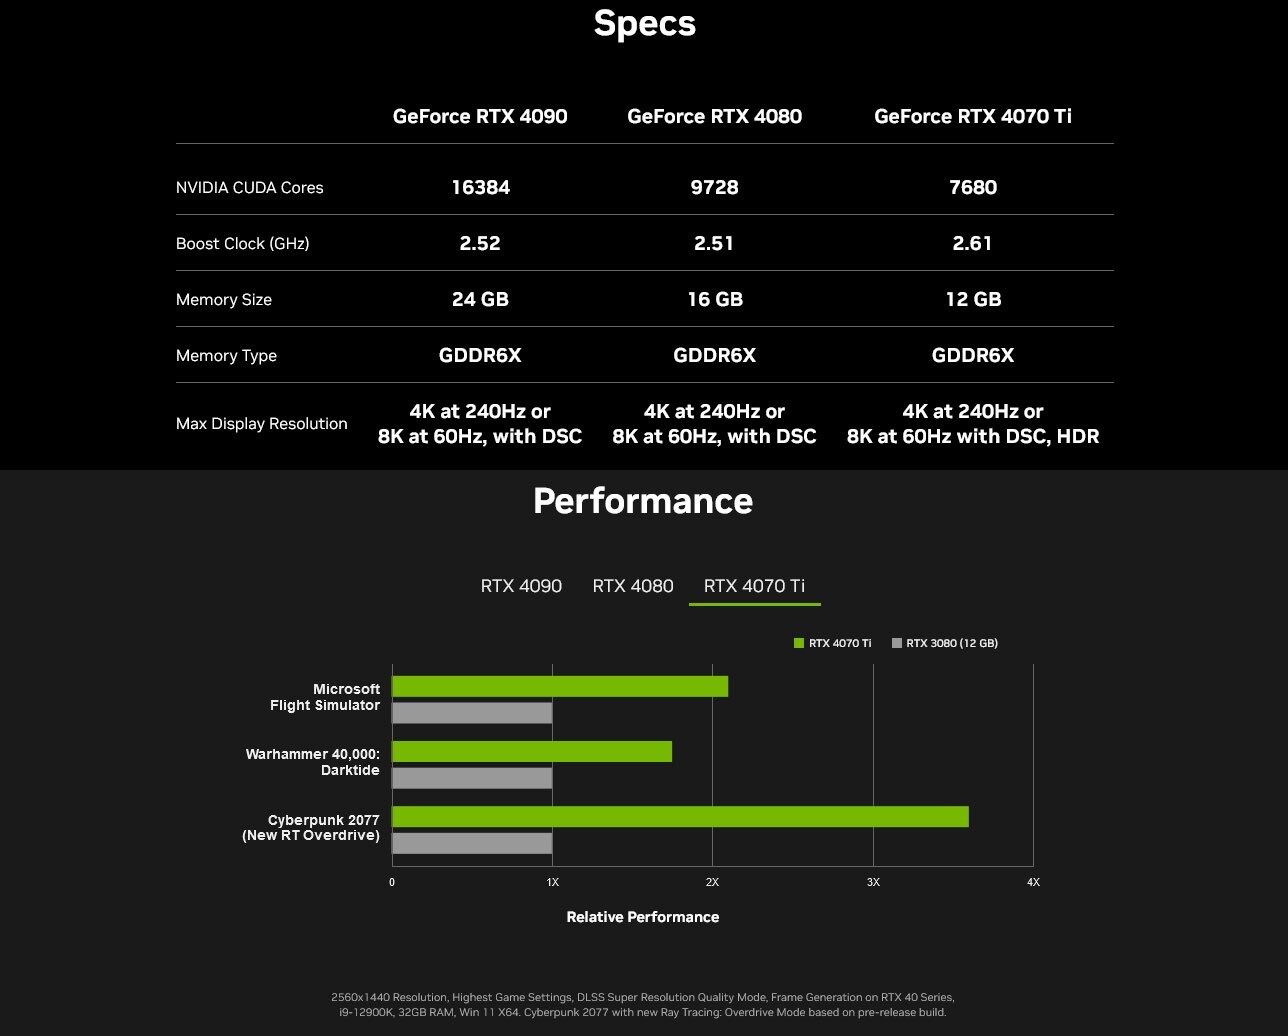 Some of the specifications of the NVIDIA GeForce RTX 4070 Ti